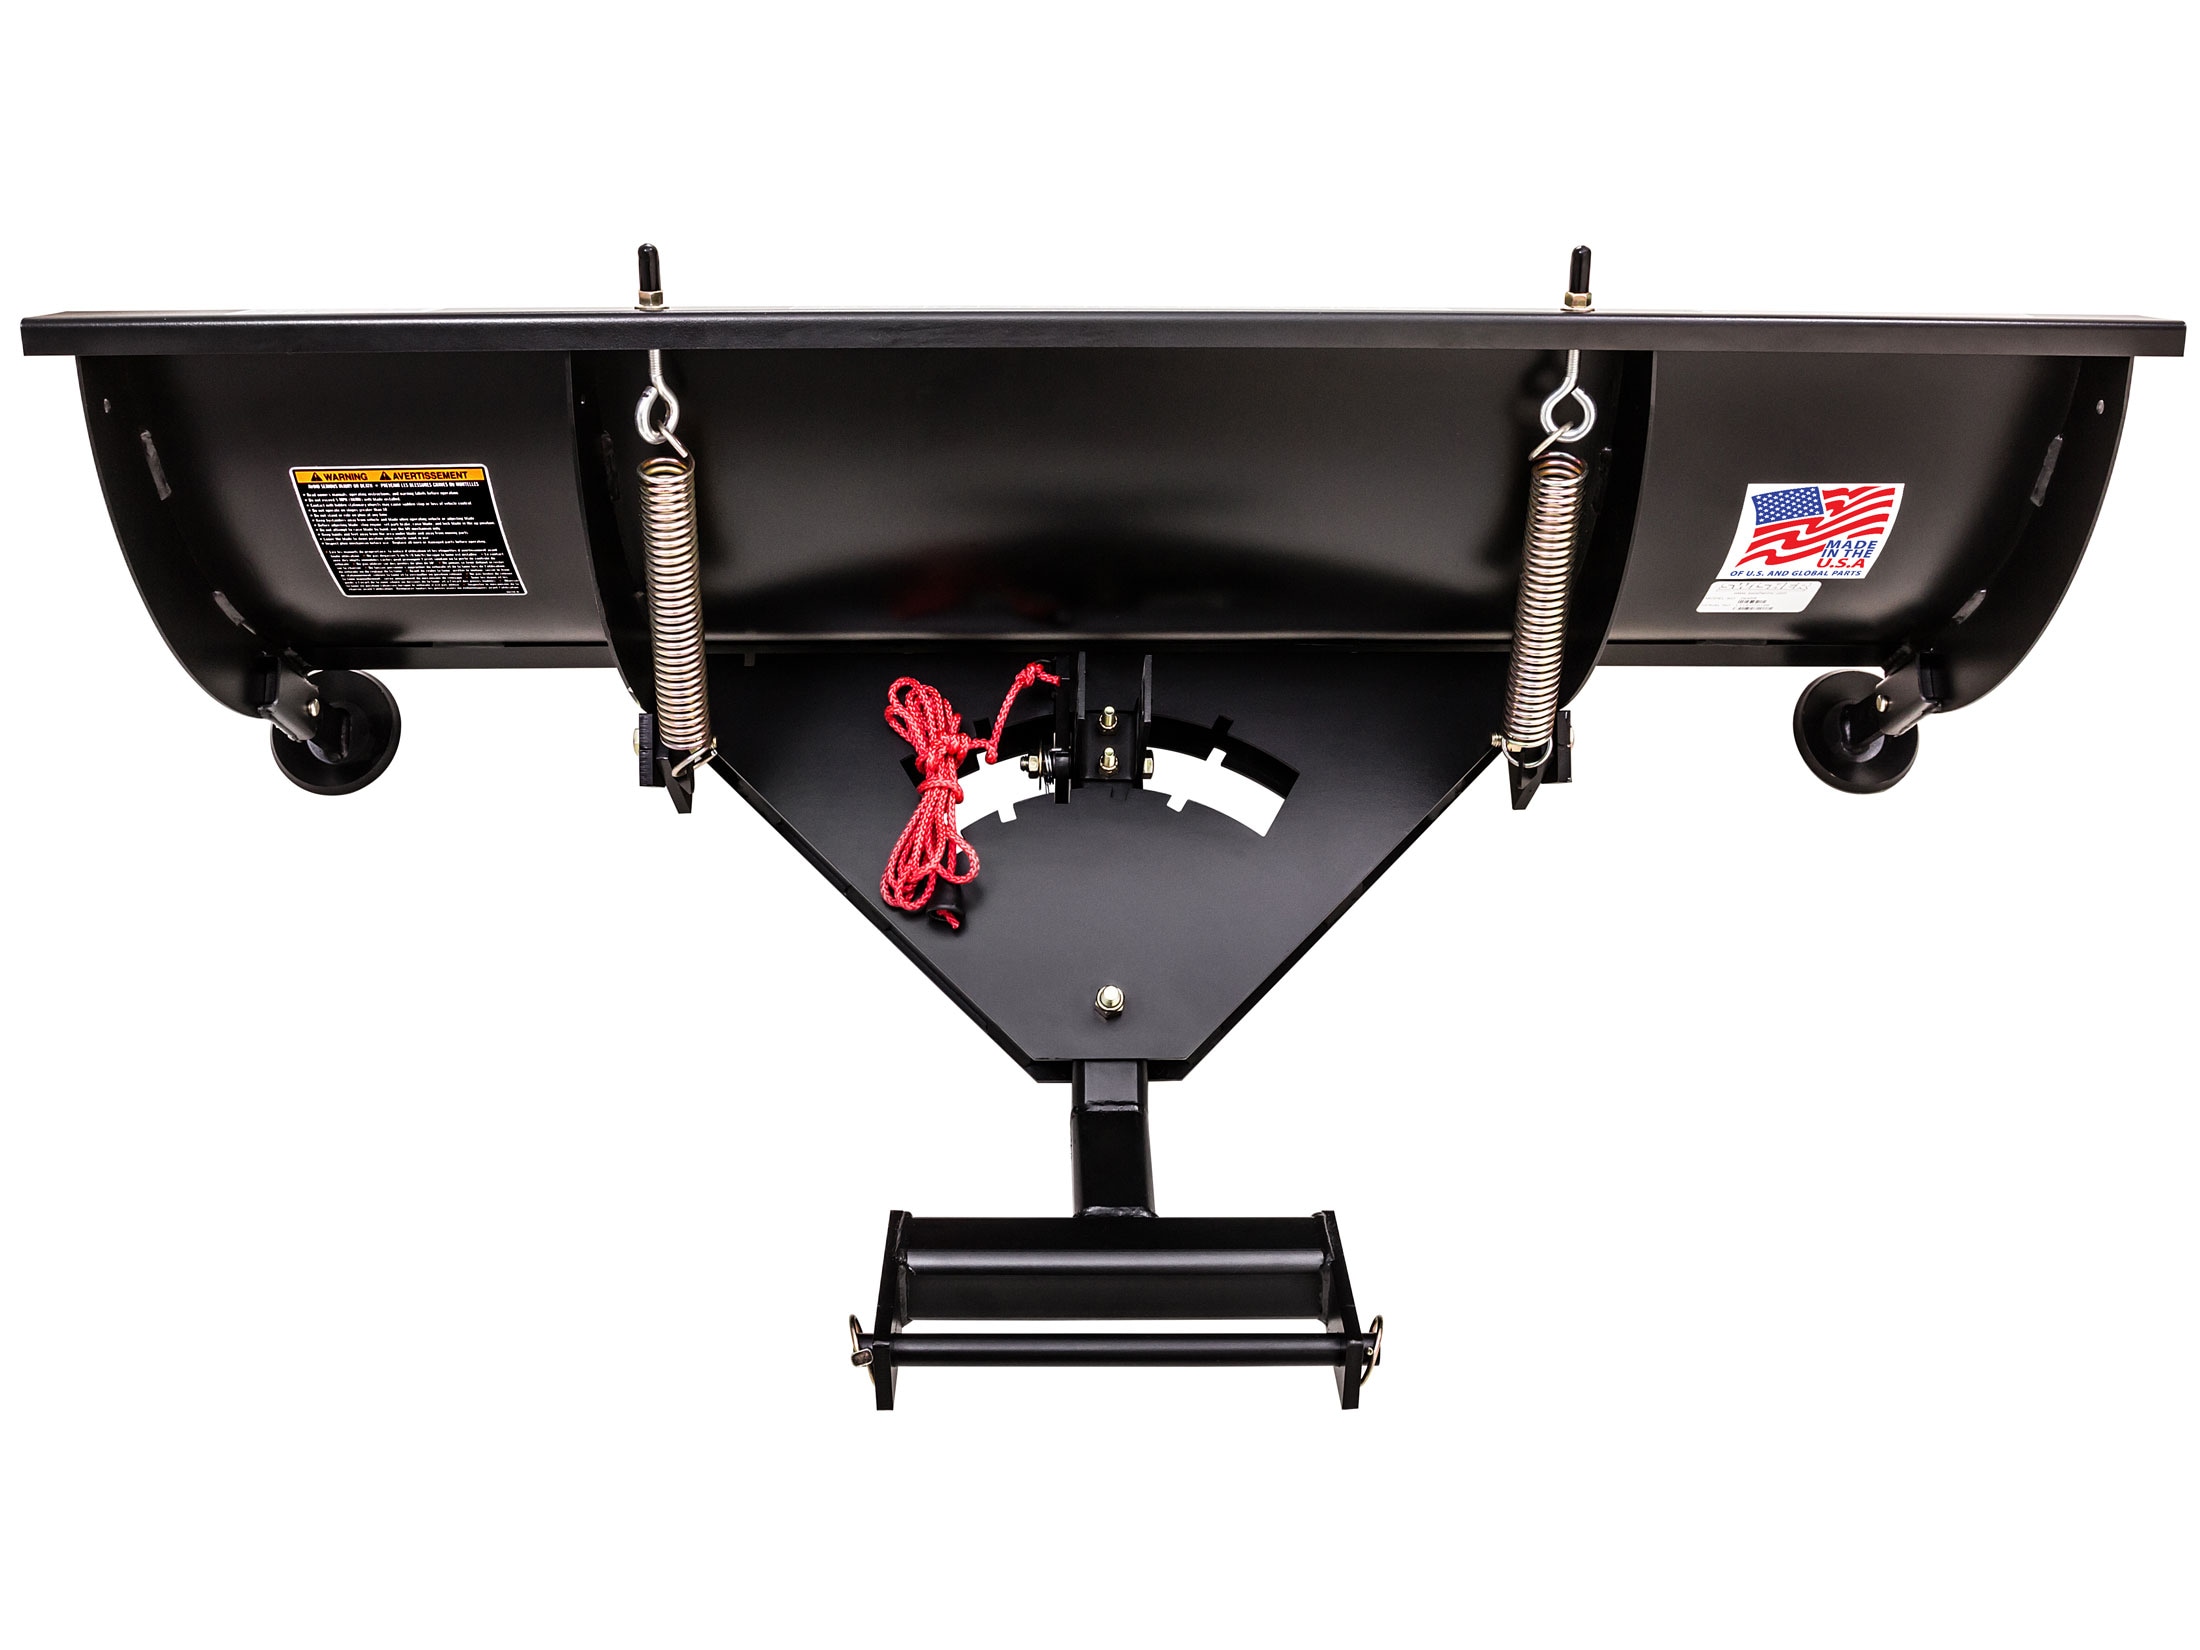 Swisher Commercial Pro ATV Plow Combo 50″ For Sale